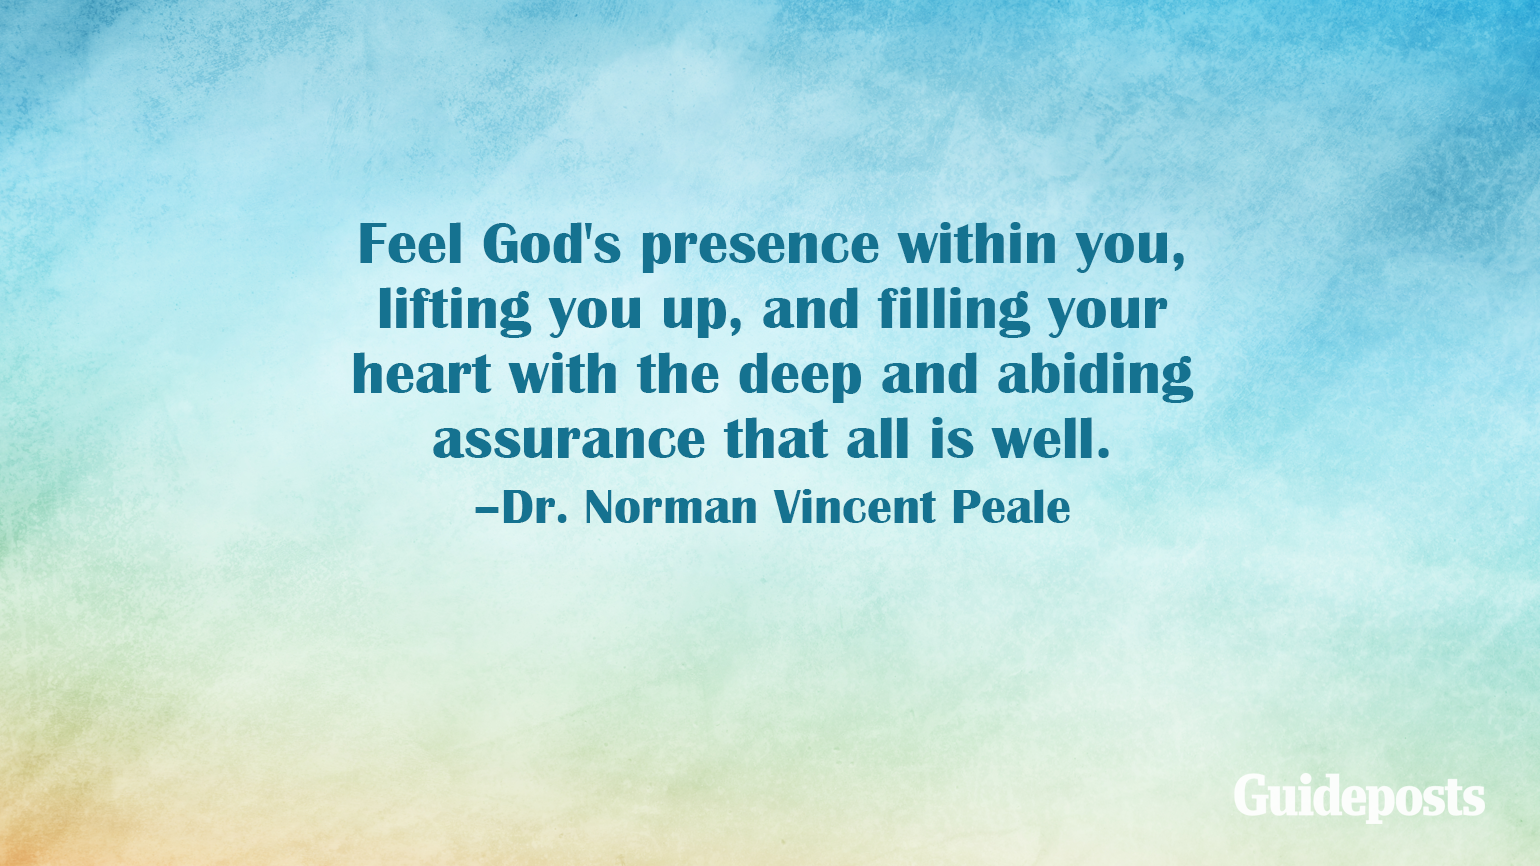 Feel God's presence within you, lifting you up, and filling your heart with the deep and abiding assurance that all is well. –Dr. Norman Vincent Peale